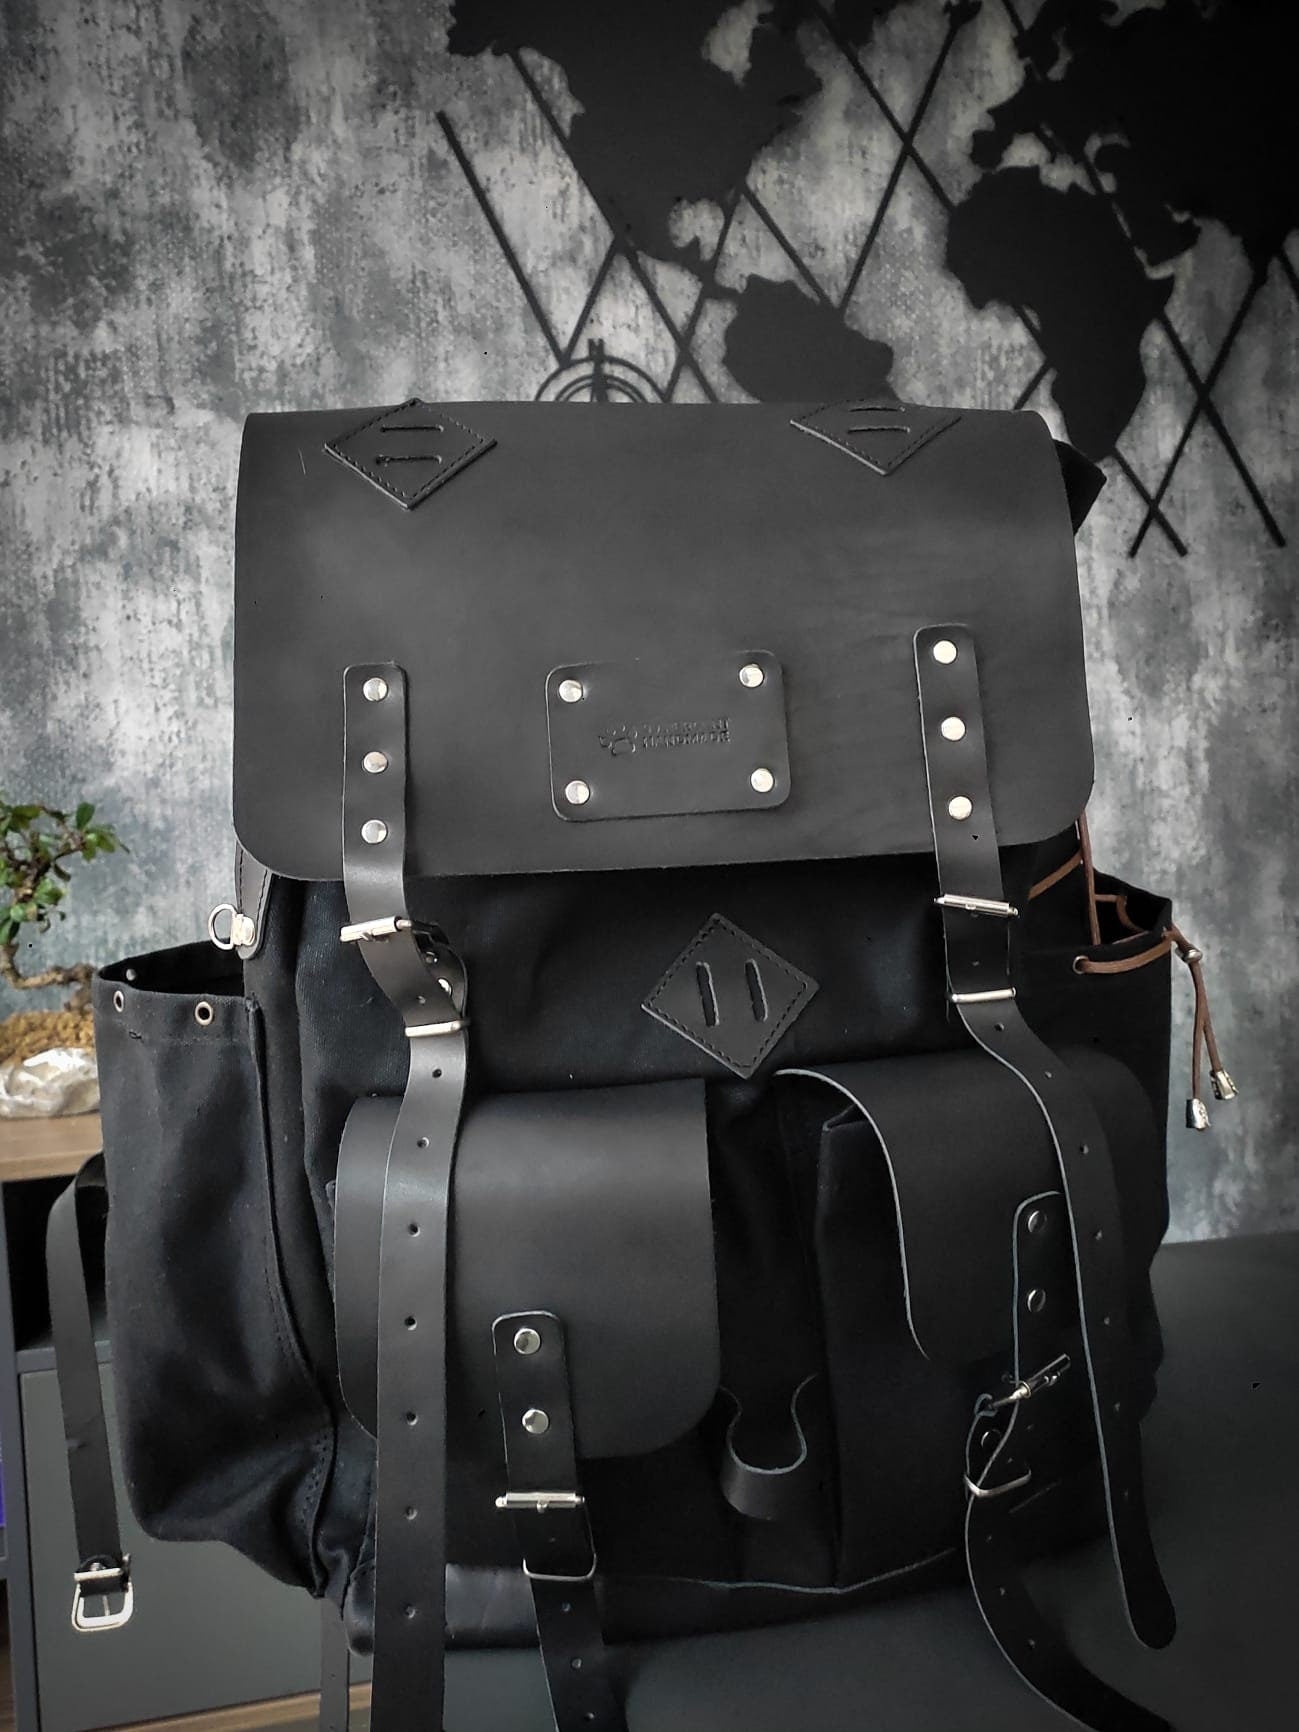 Limited Bestseller Custom Genuine Black Waxed Canvas with Leather Details Backpack for Travel, Camping | 60 Liters | Personalization  99percenthandmade   